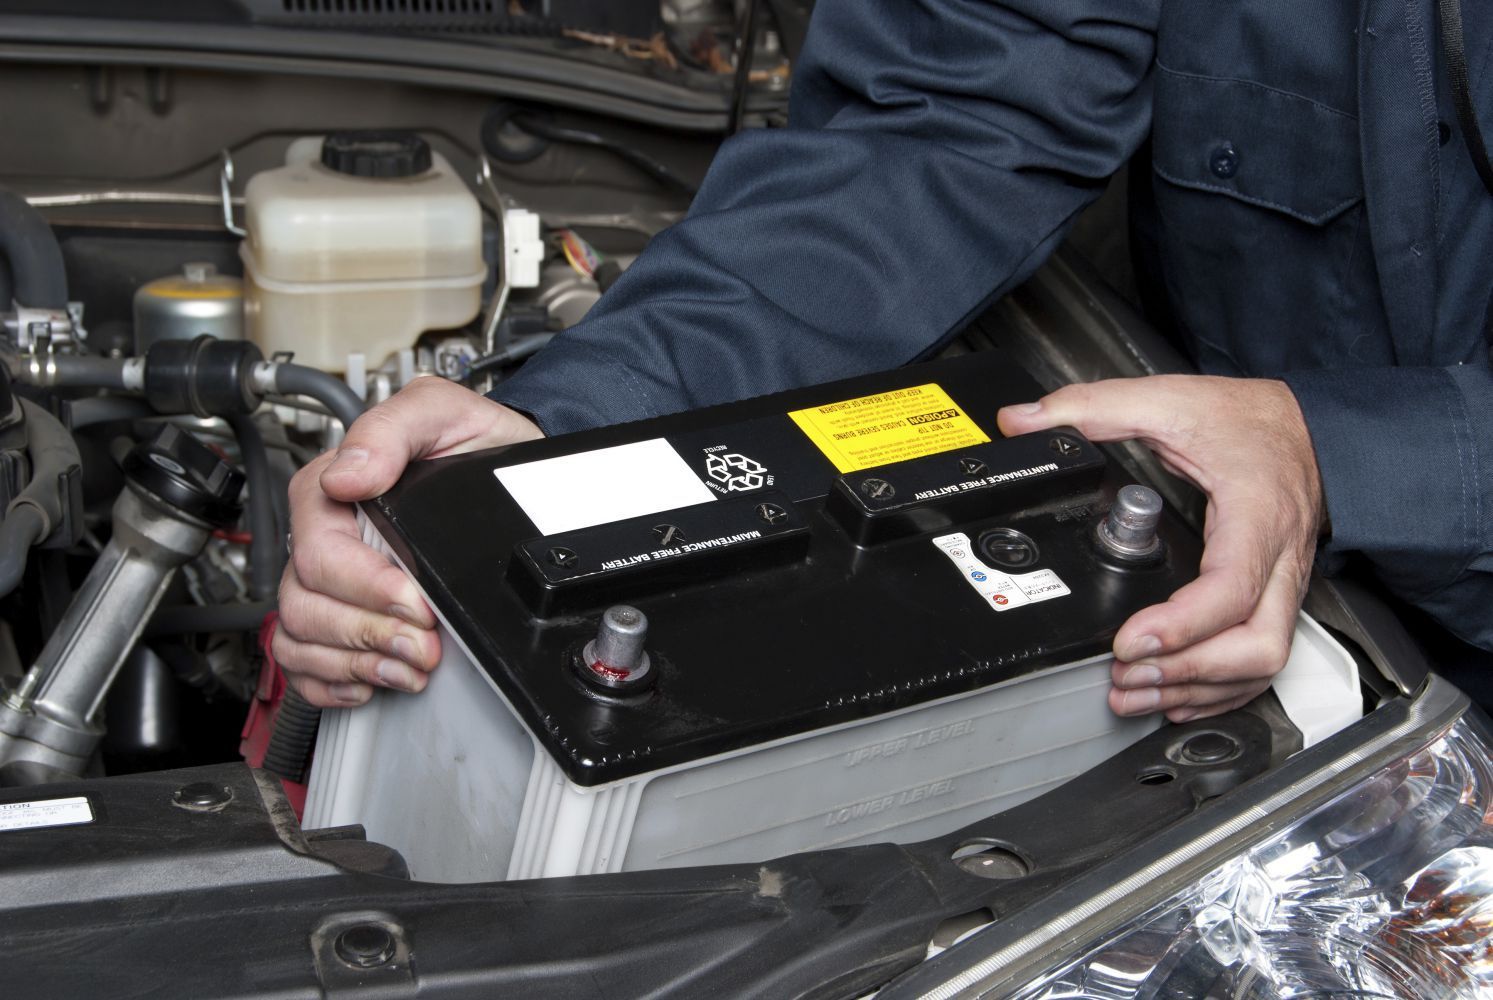 Mechanic is removing a car battery